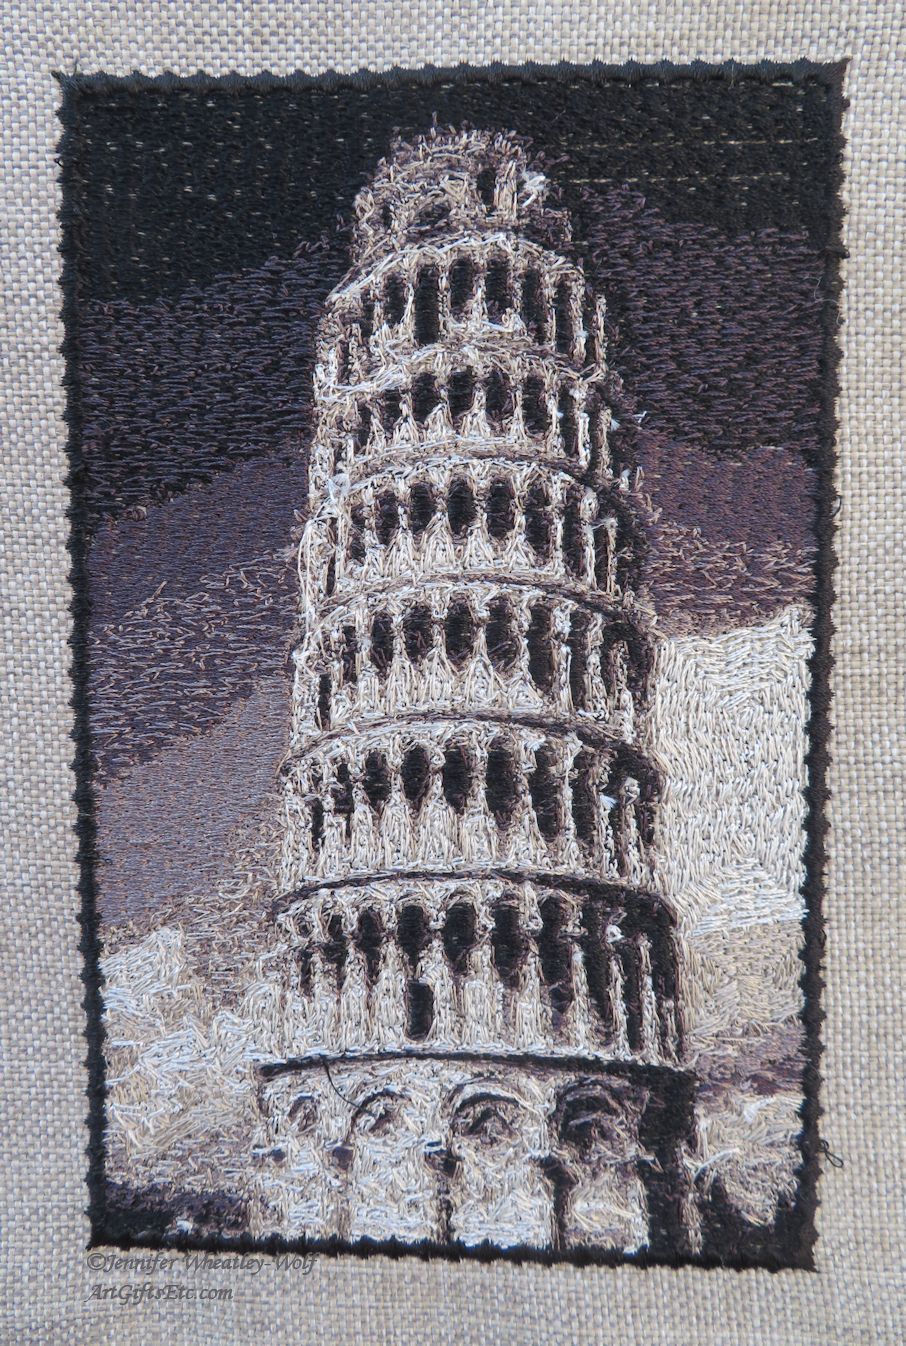 Leaning-tower-of-Pisa-Sfumato-embroidery